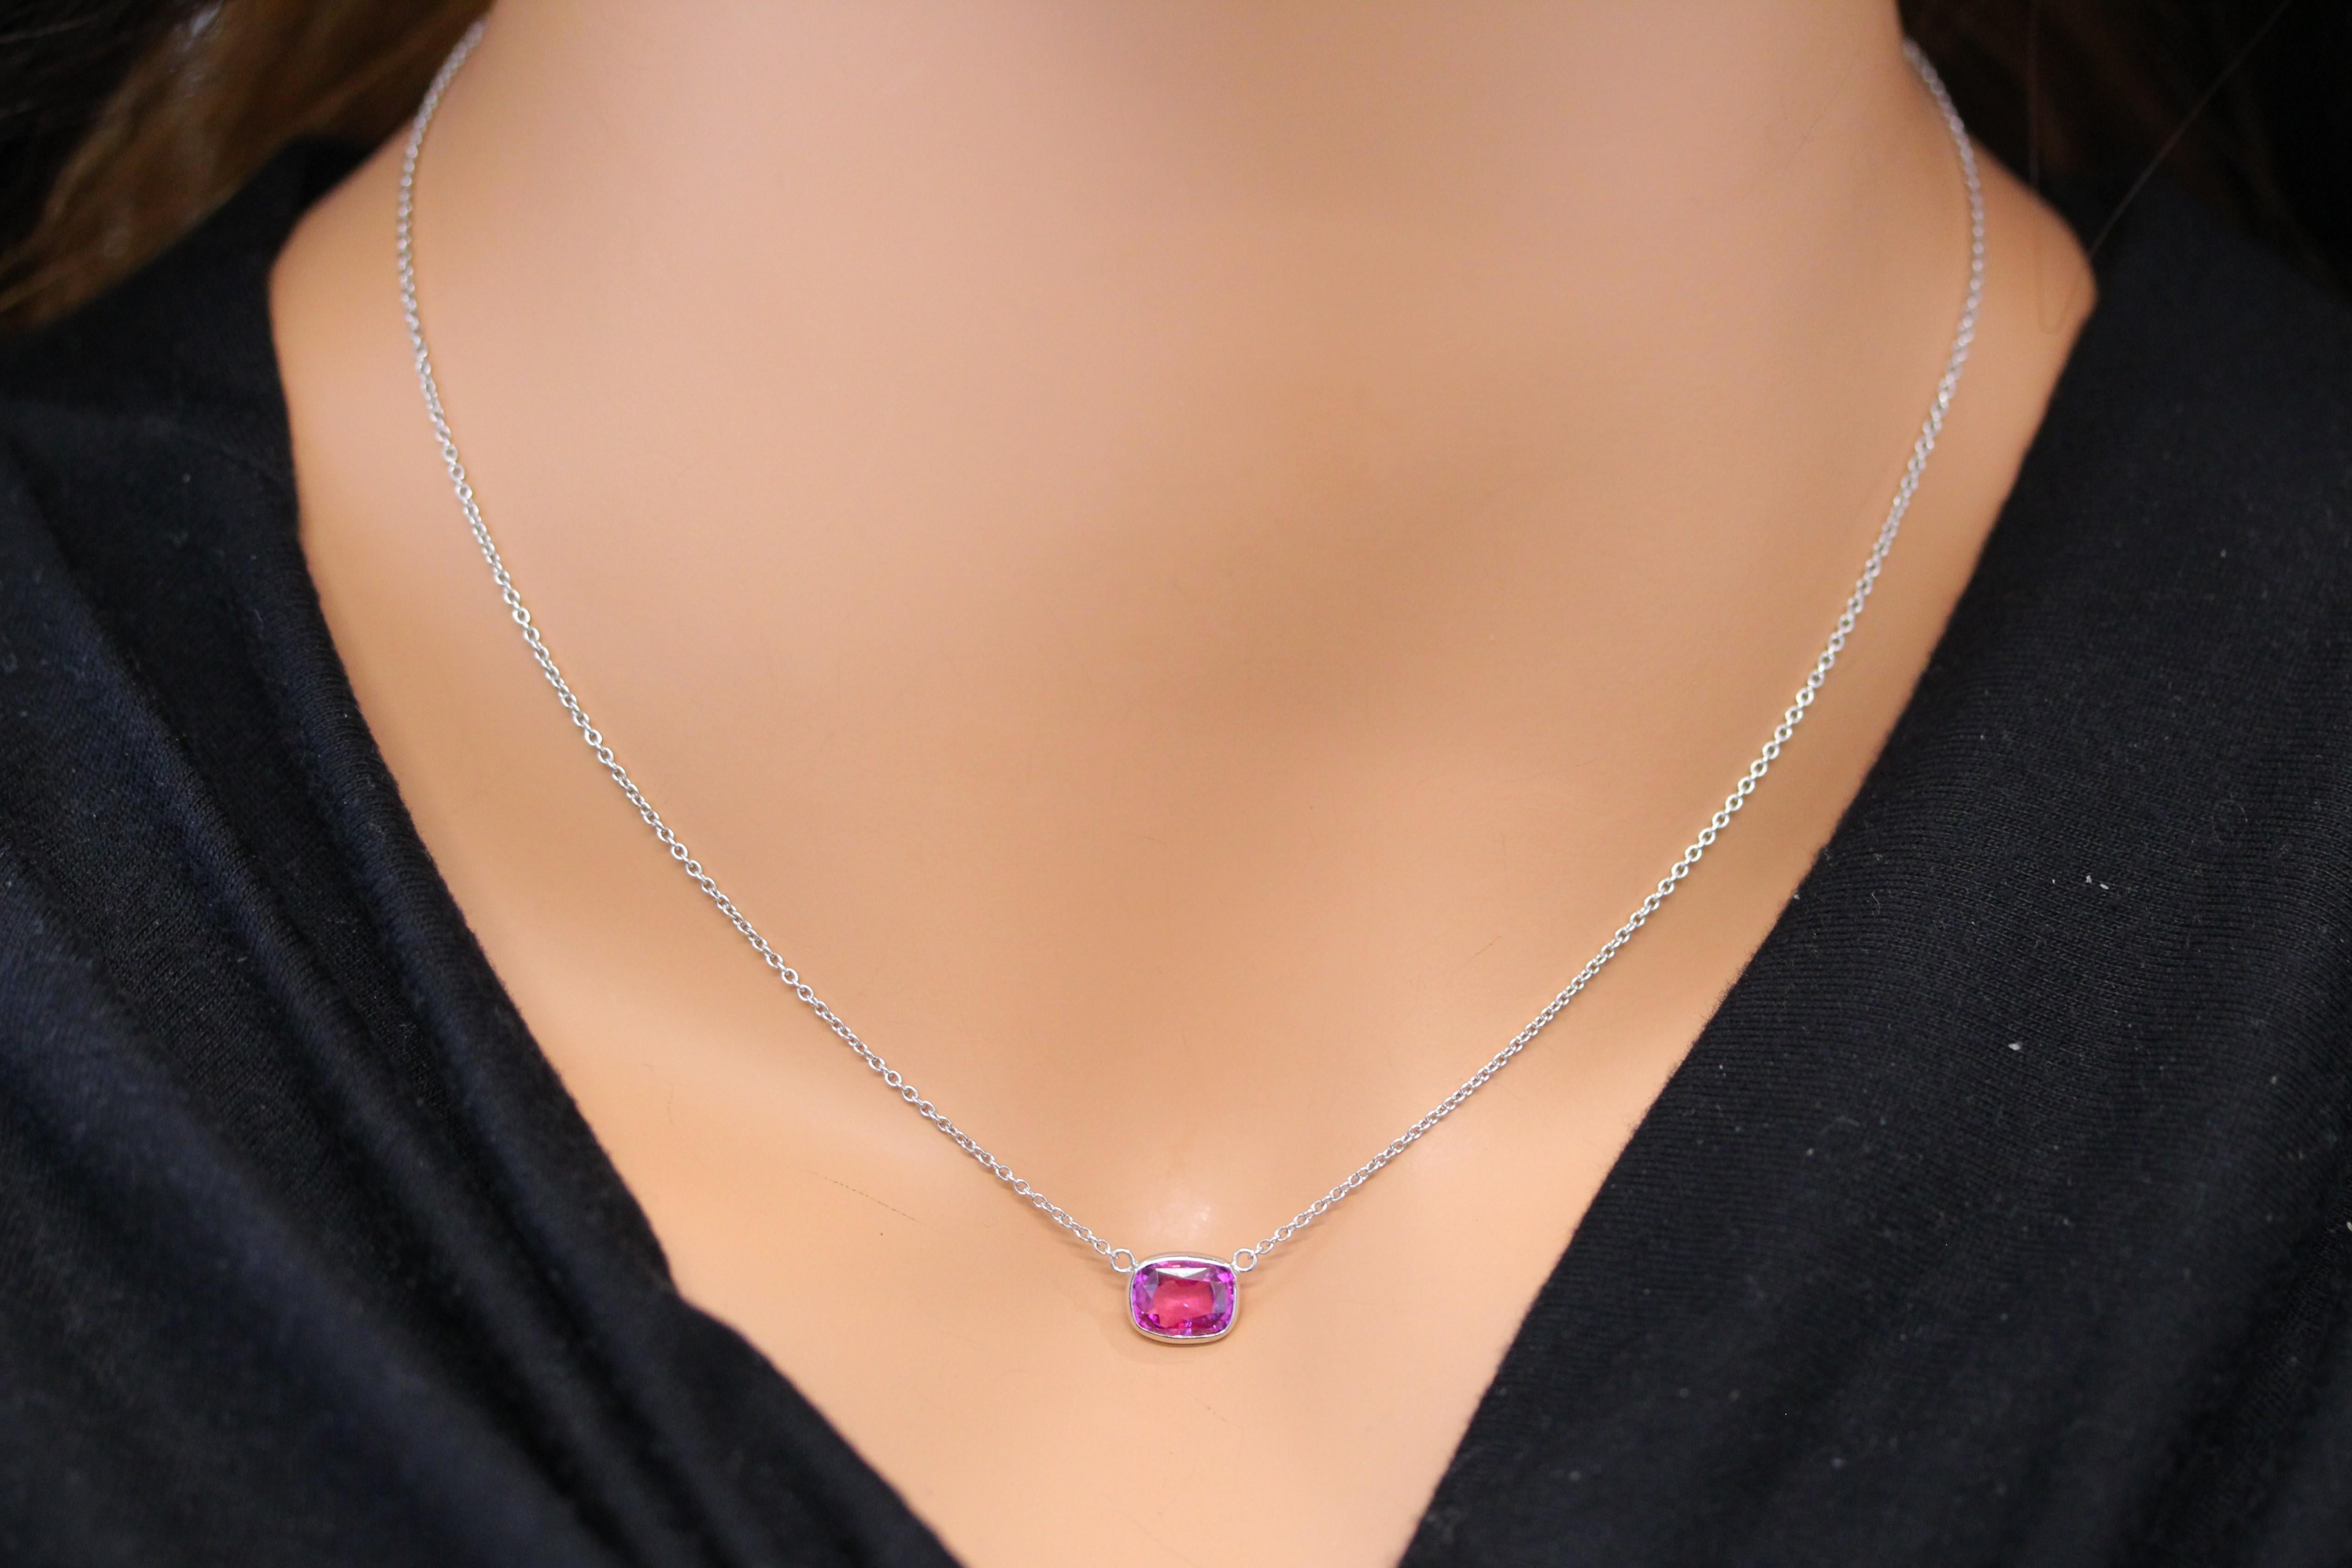 Contemporary 2.08 Carat Cushion Sapphire Purplish Pink Fashion Necklaces In 14k White Gold For Sale